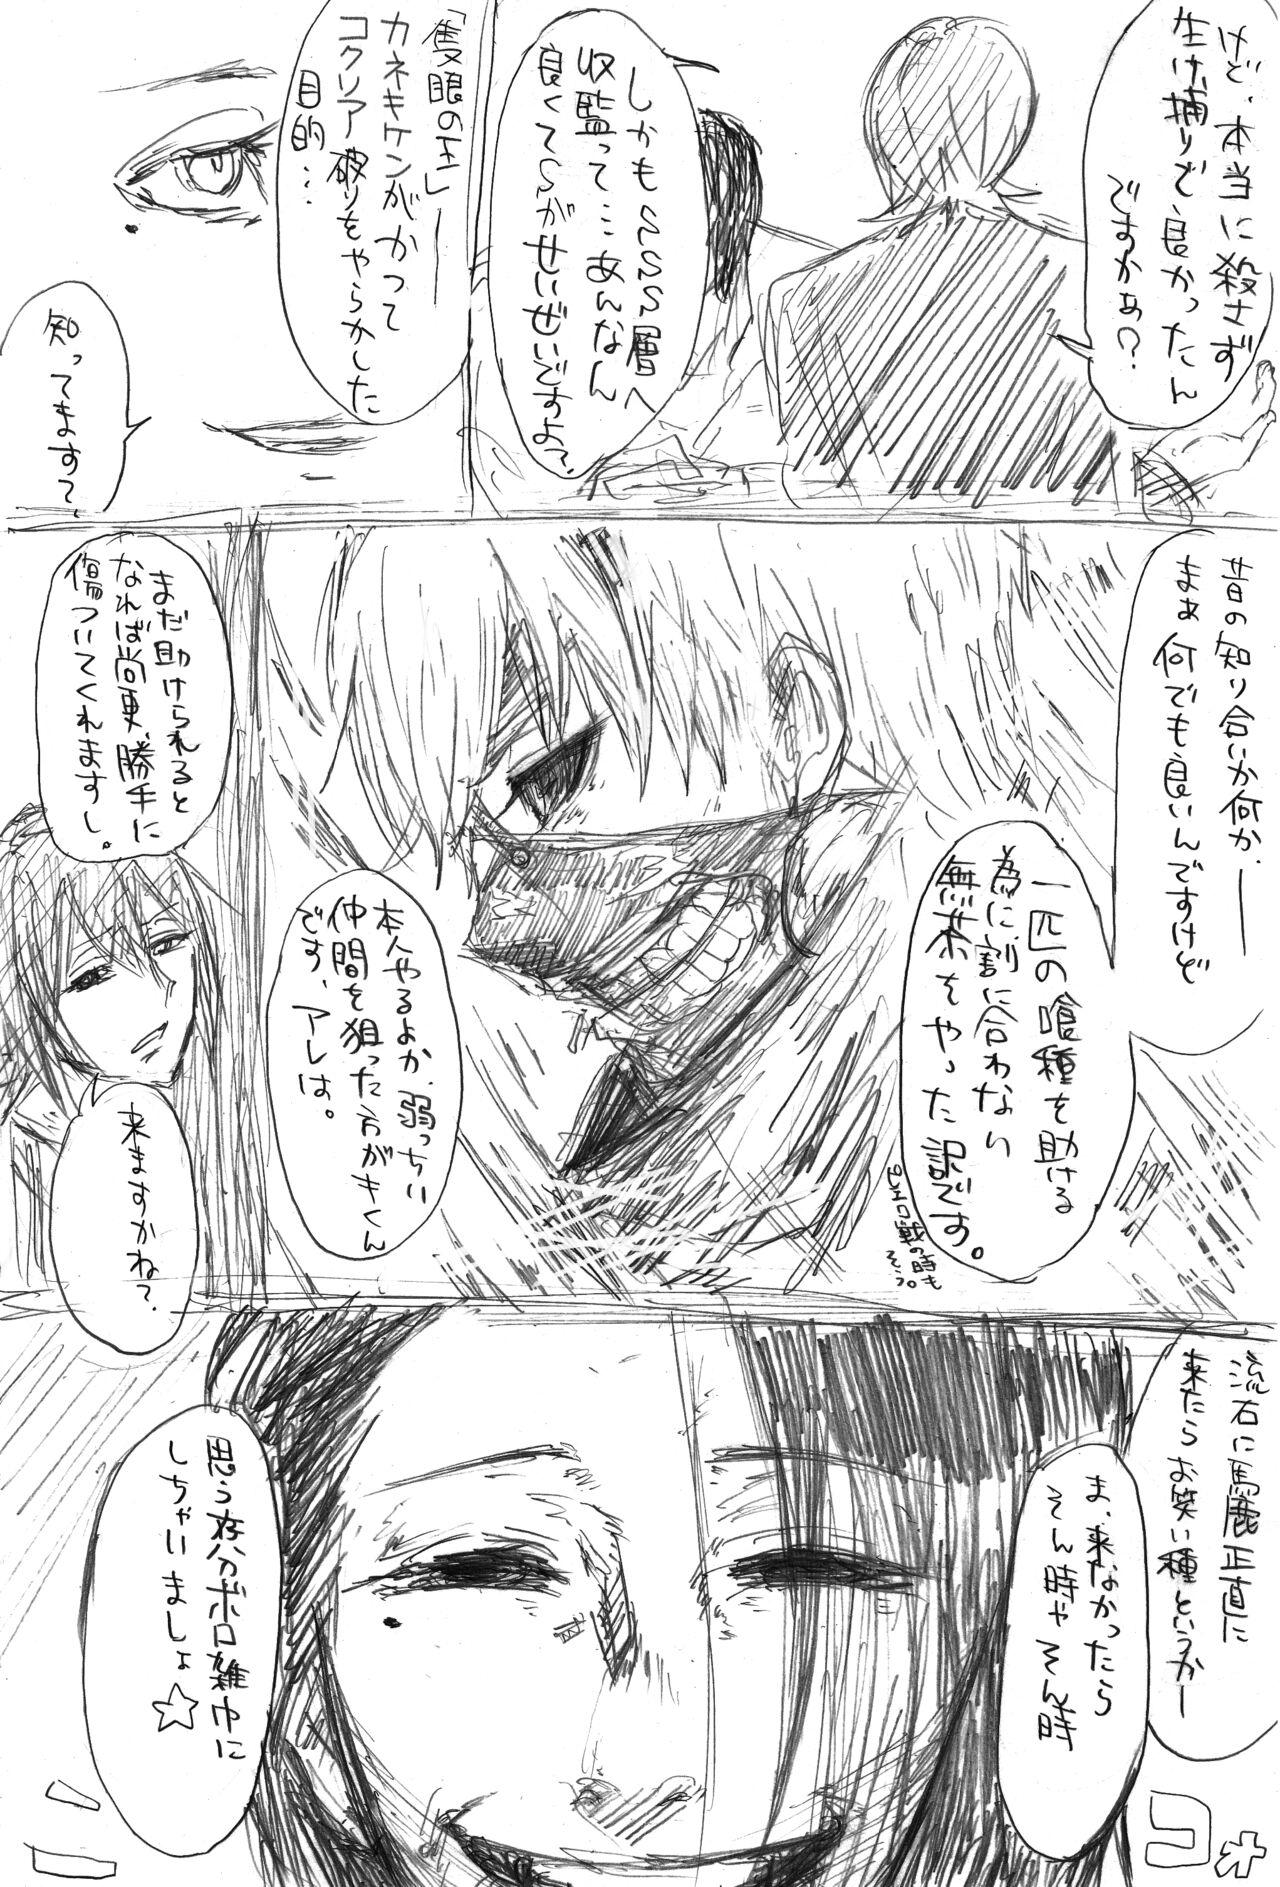 Spying トーカちゃん囚われIF - Tokyo ghoul Short - Page 2